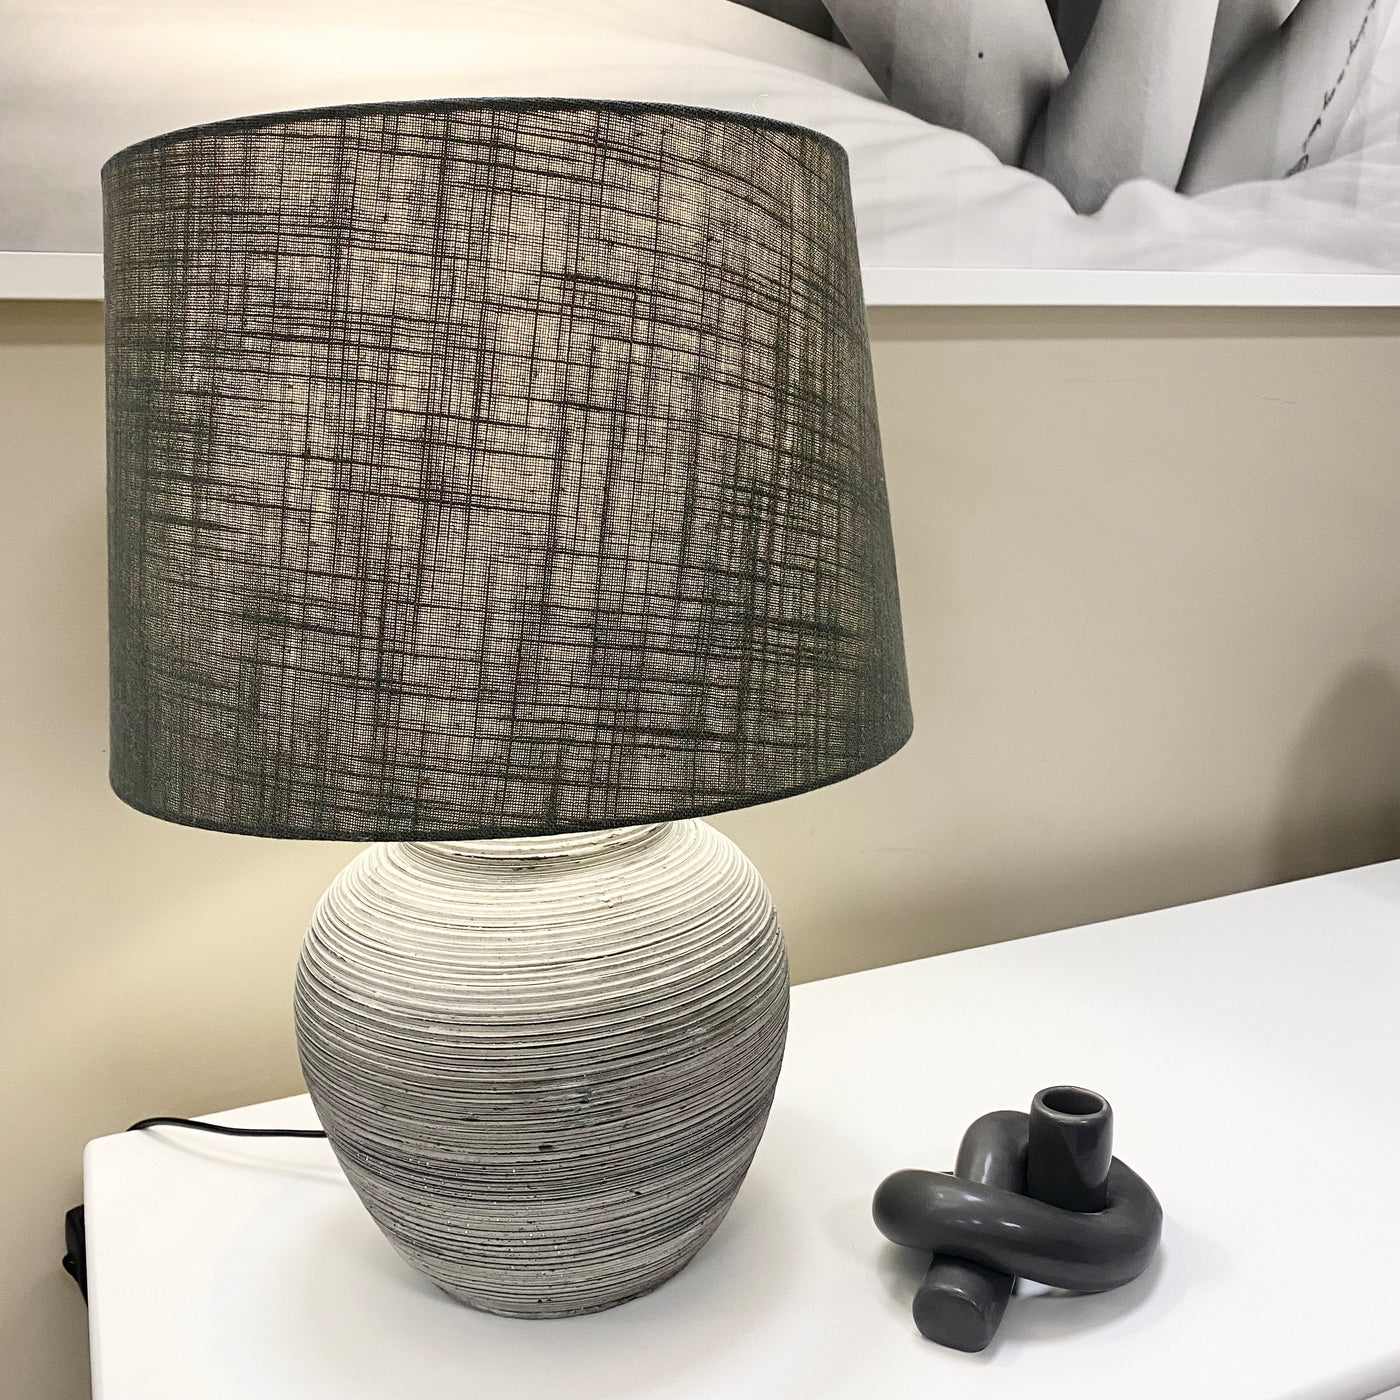 Stone Effect Lamp With Shade